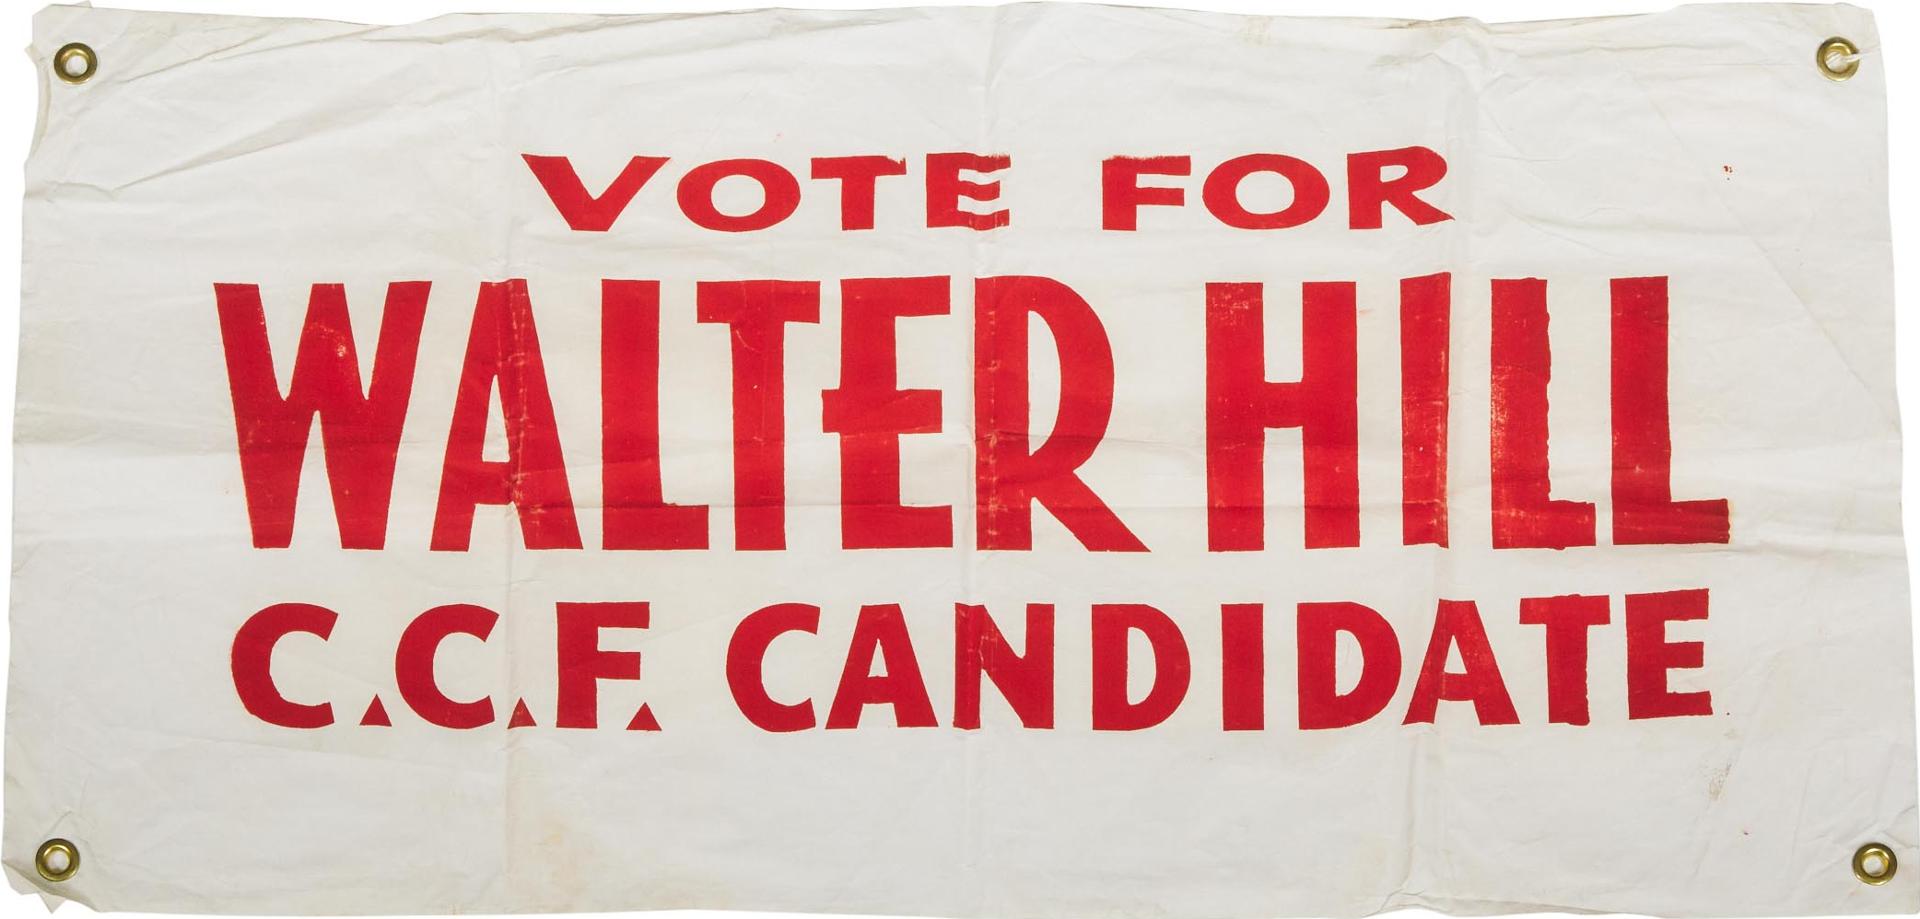 Co-operative Commonwealth Federation - Vote For Walter Hill, C.C.F Candidate